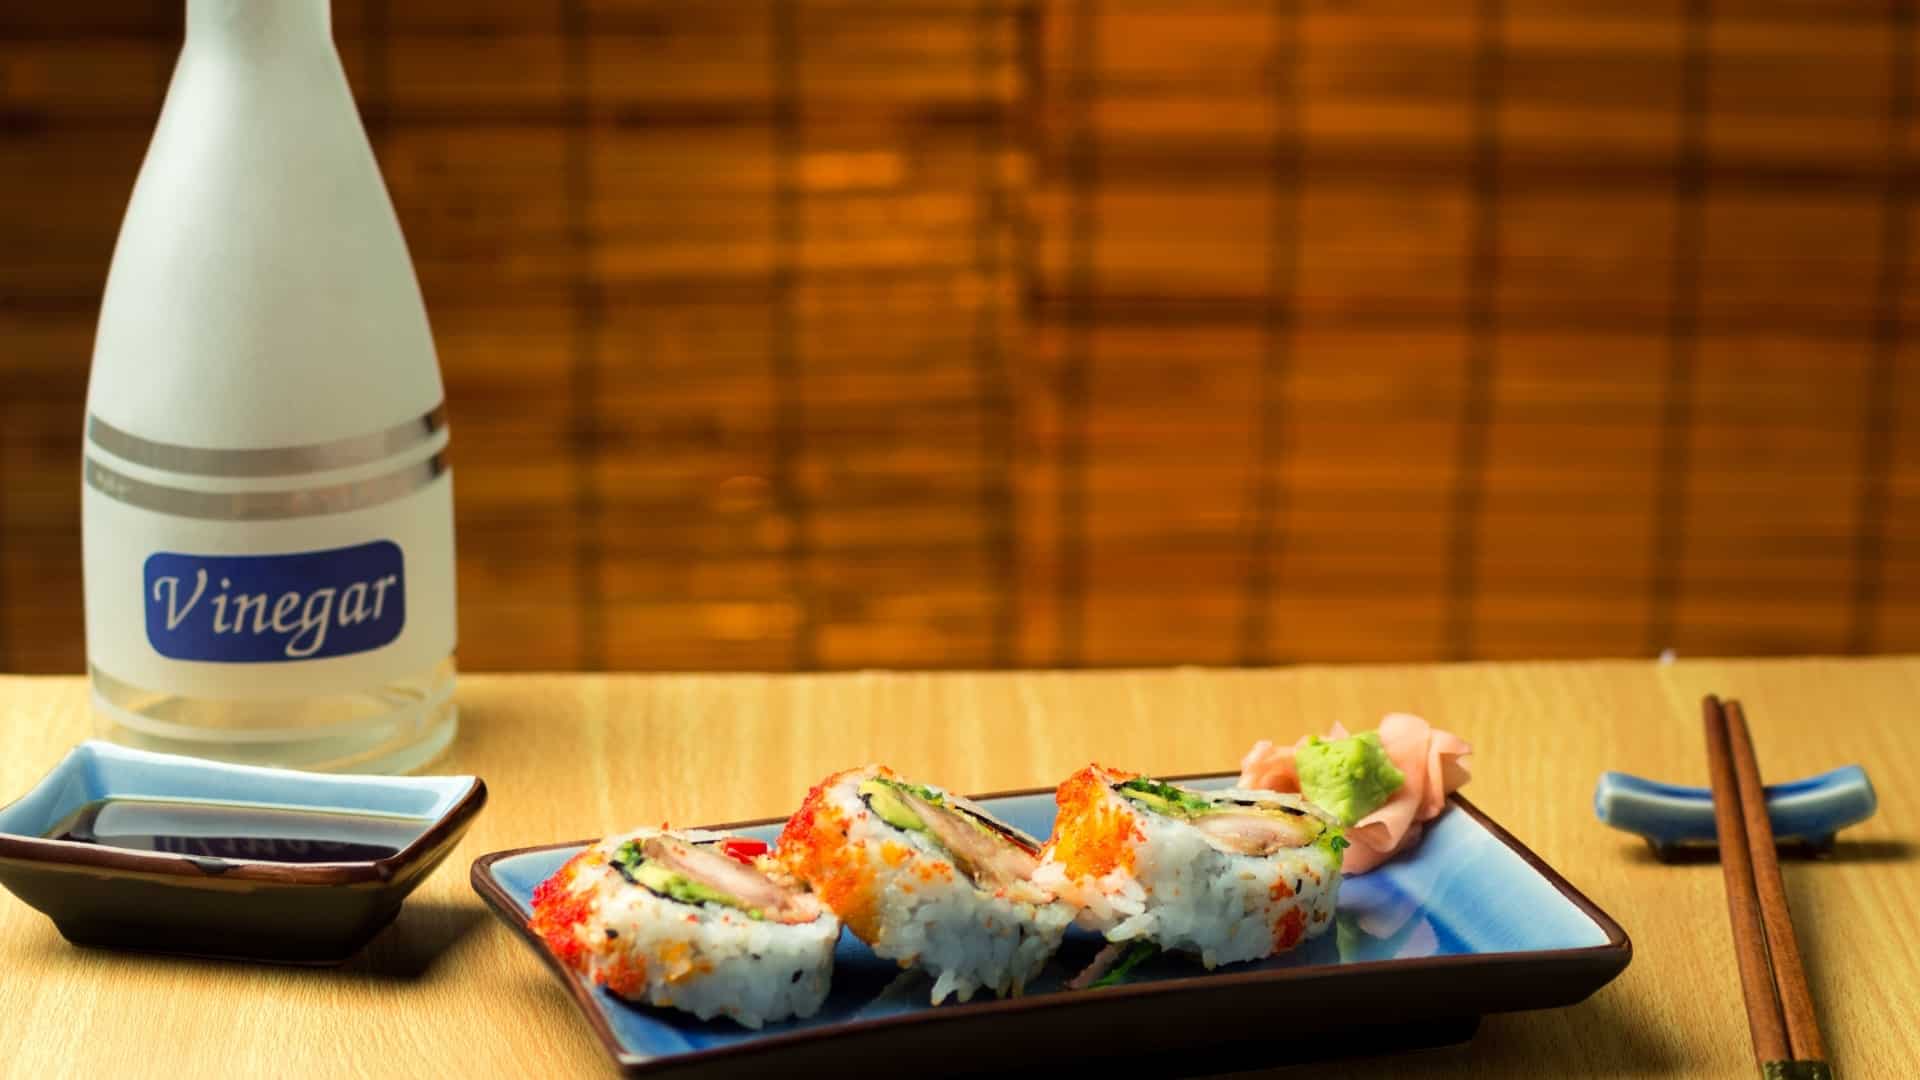 Japanese sushi vinegar on a table with pieces of sushi